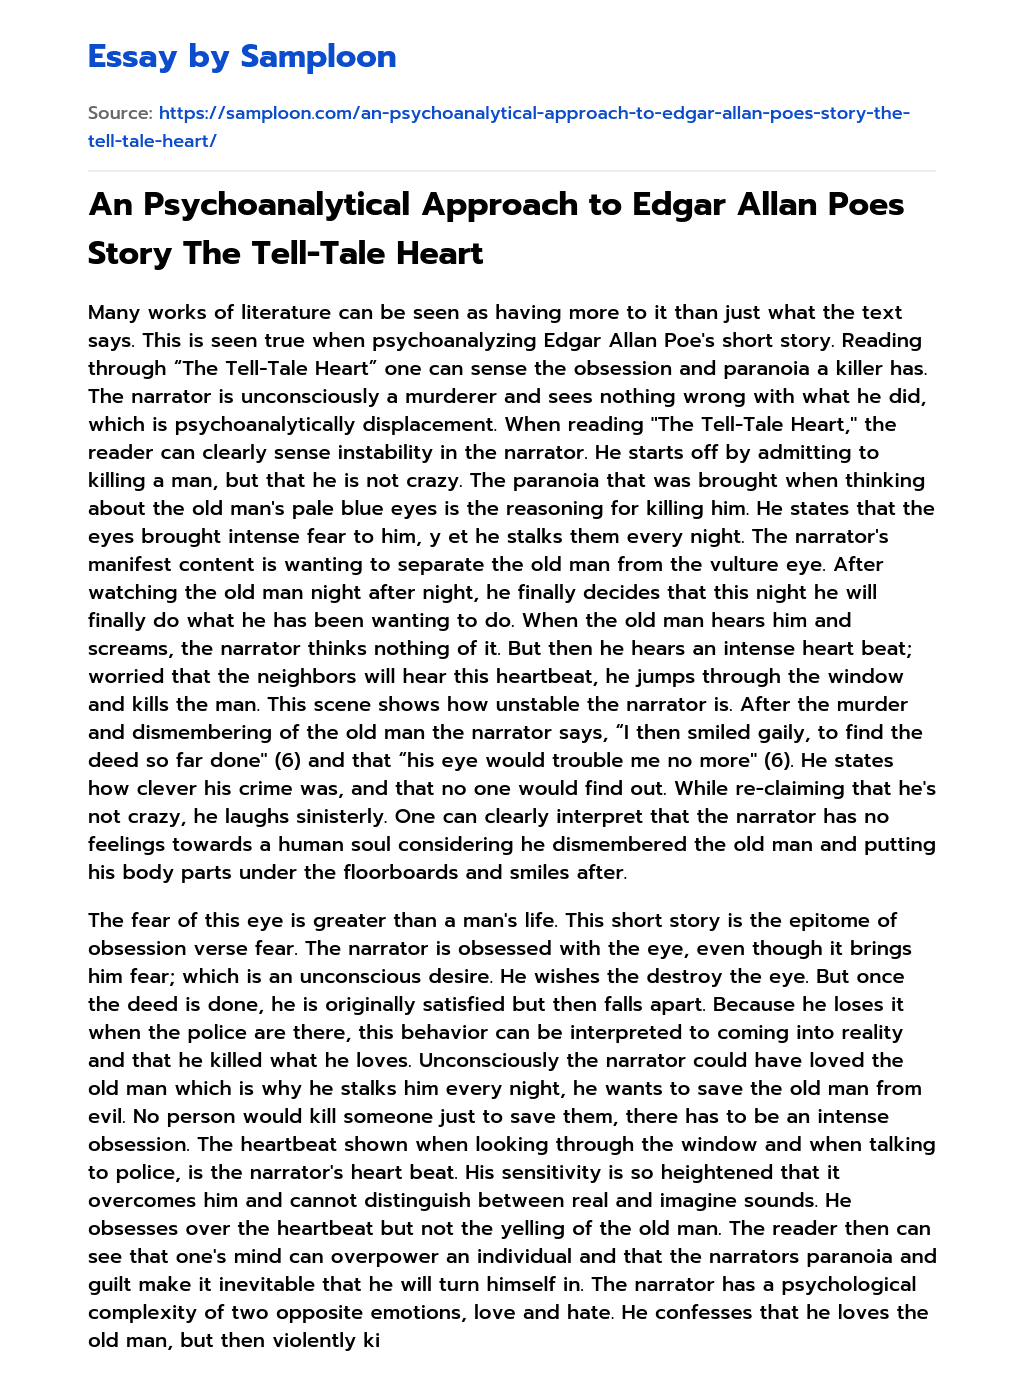 An Psychoanalytical Approach to Edgar Allan Poes Story The Tell-Tale Heart essay